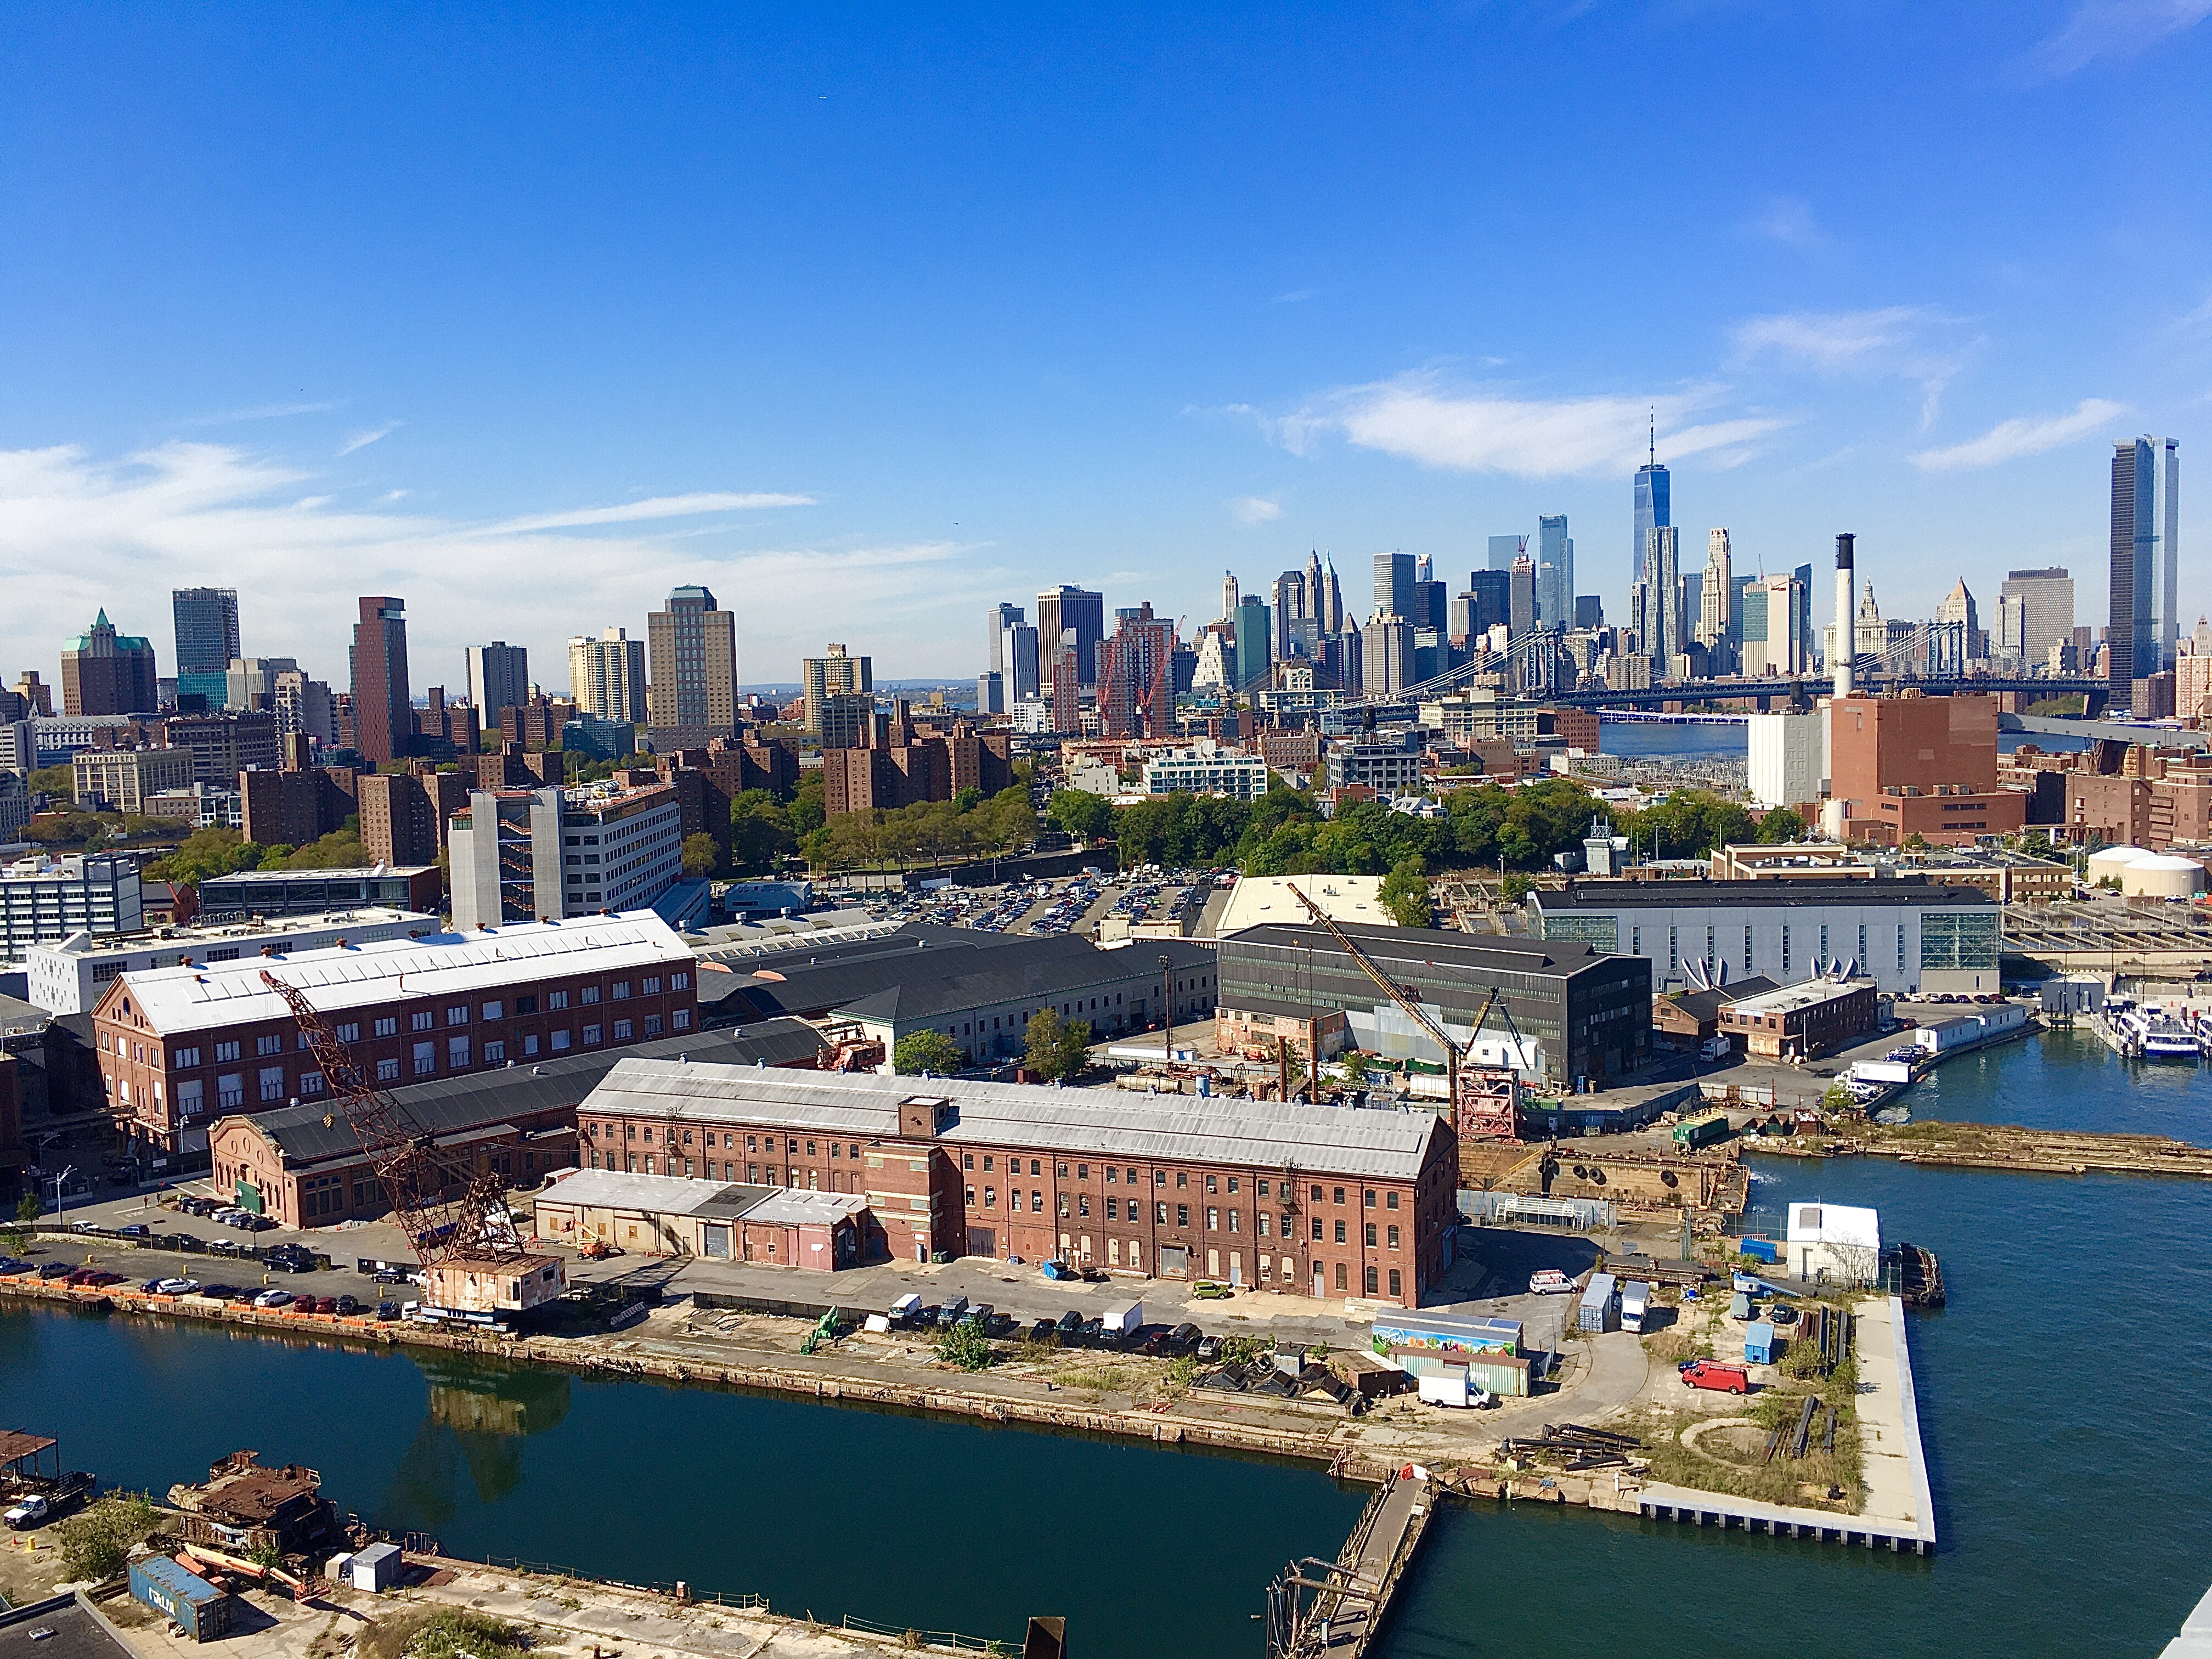 Dock 72’s got quite a view of historic Brooklyn Navy Yard buildings down below and the World Trade Center on the horizon. Eagle photo by Lore Croghan